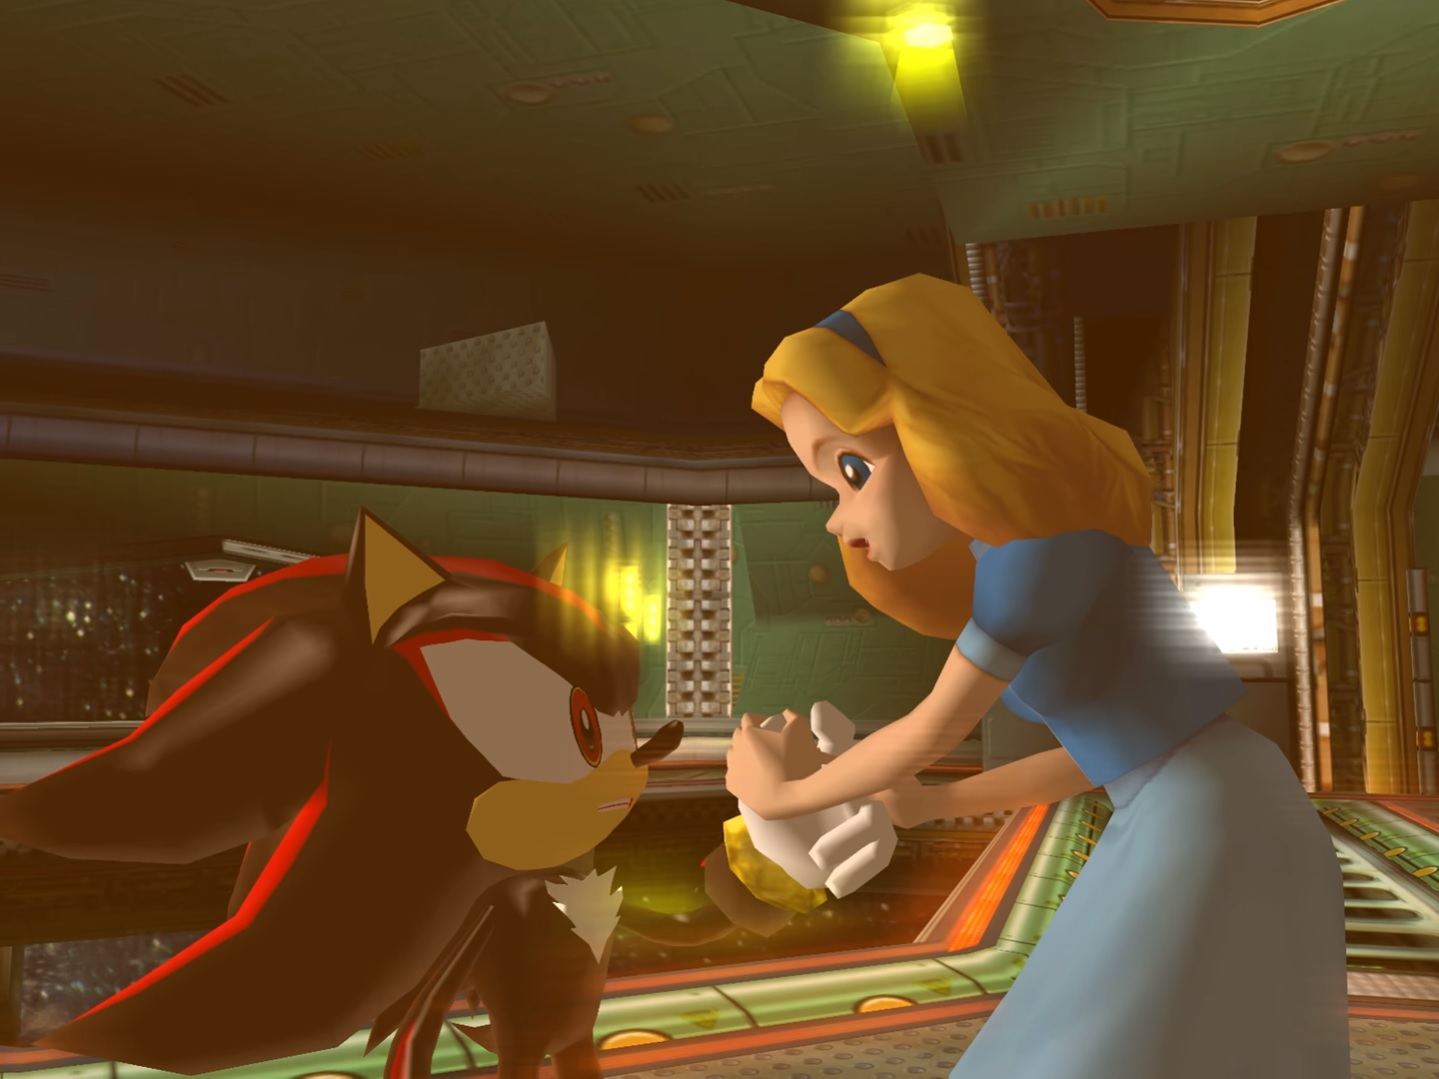 shadow the hedgehog and maria sonic x